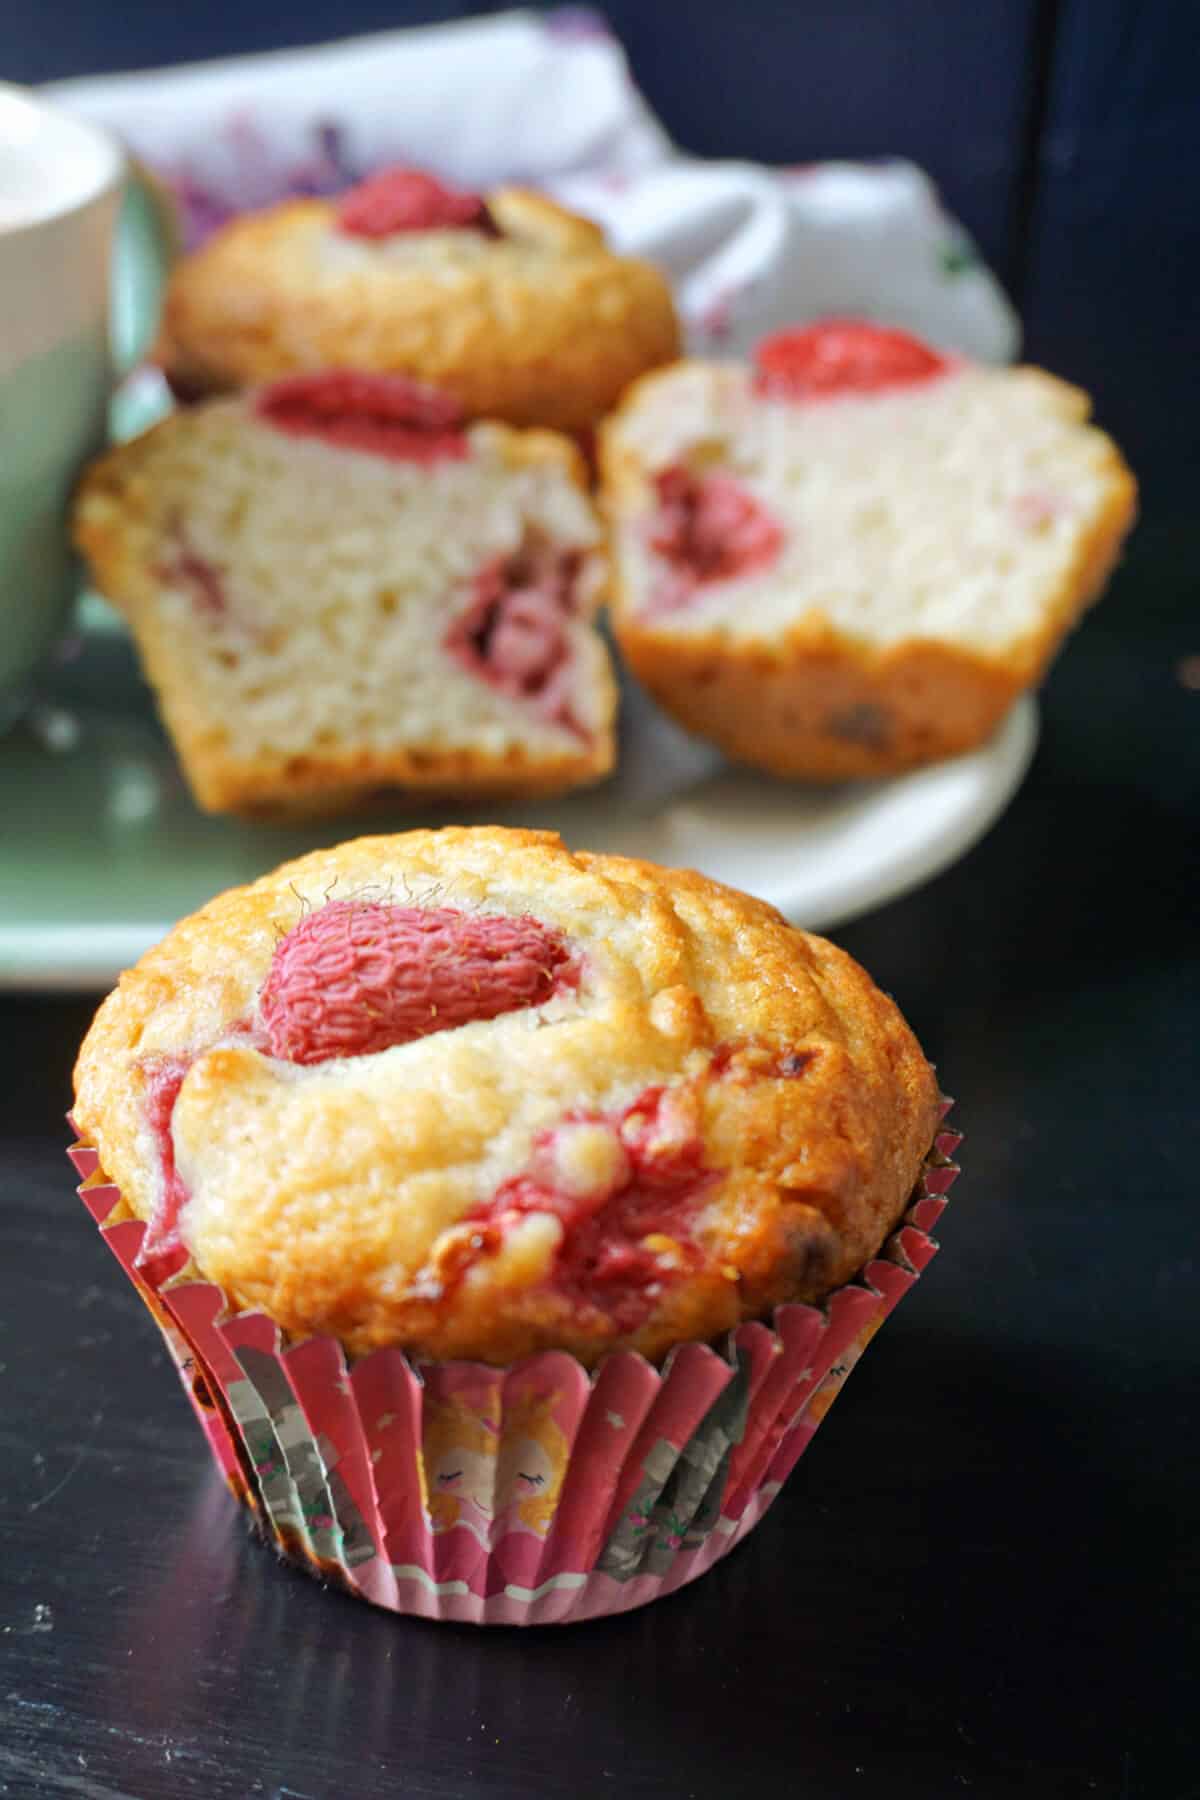 A raspberry muffin with a plate of 2 halves of a muffin and another whole muffin in the background.